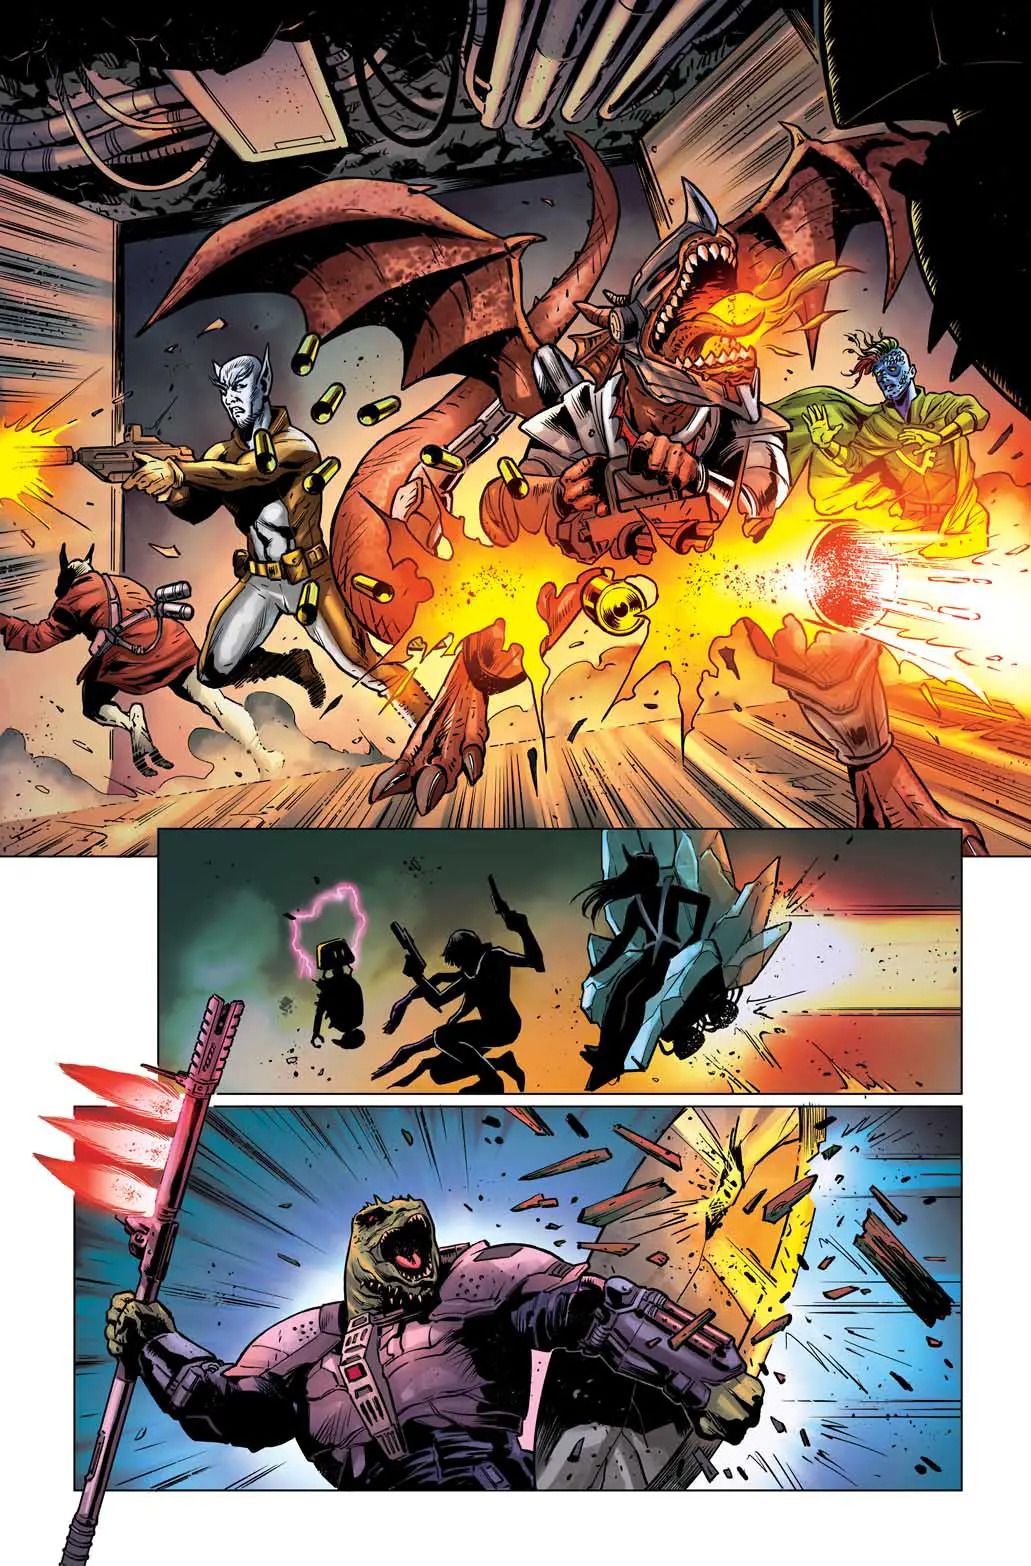 Soldiers and a dragon come through a doorway breathing fire and shooting Starfinder Angels of the Drift #1 page 6